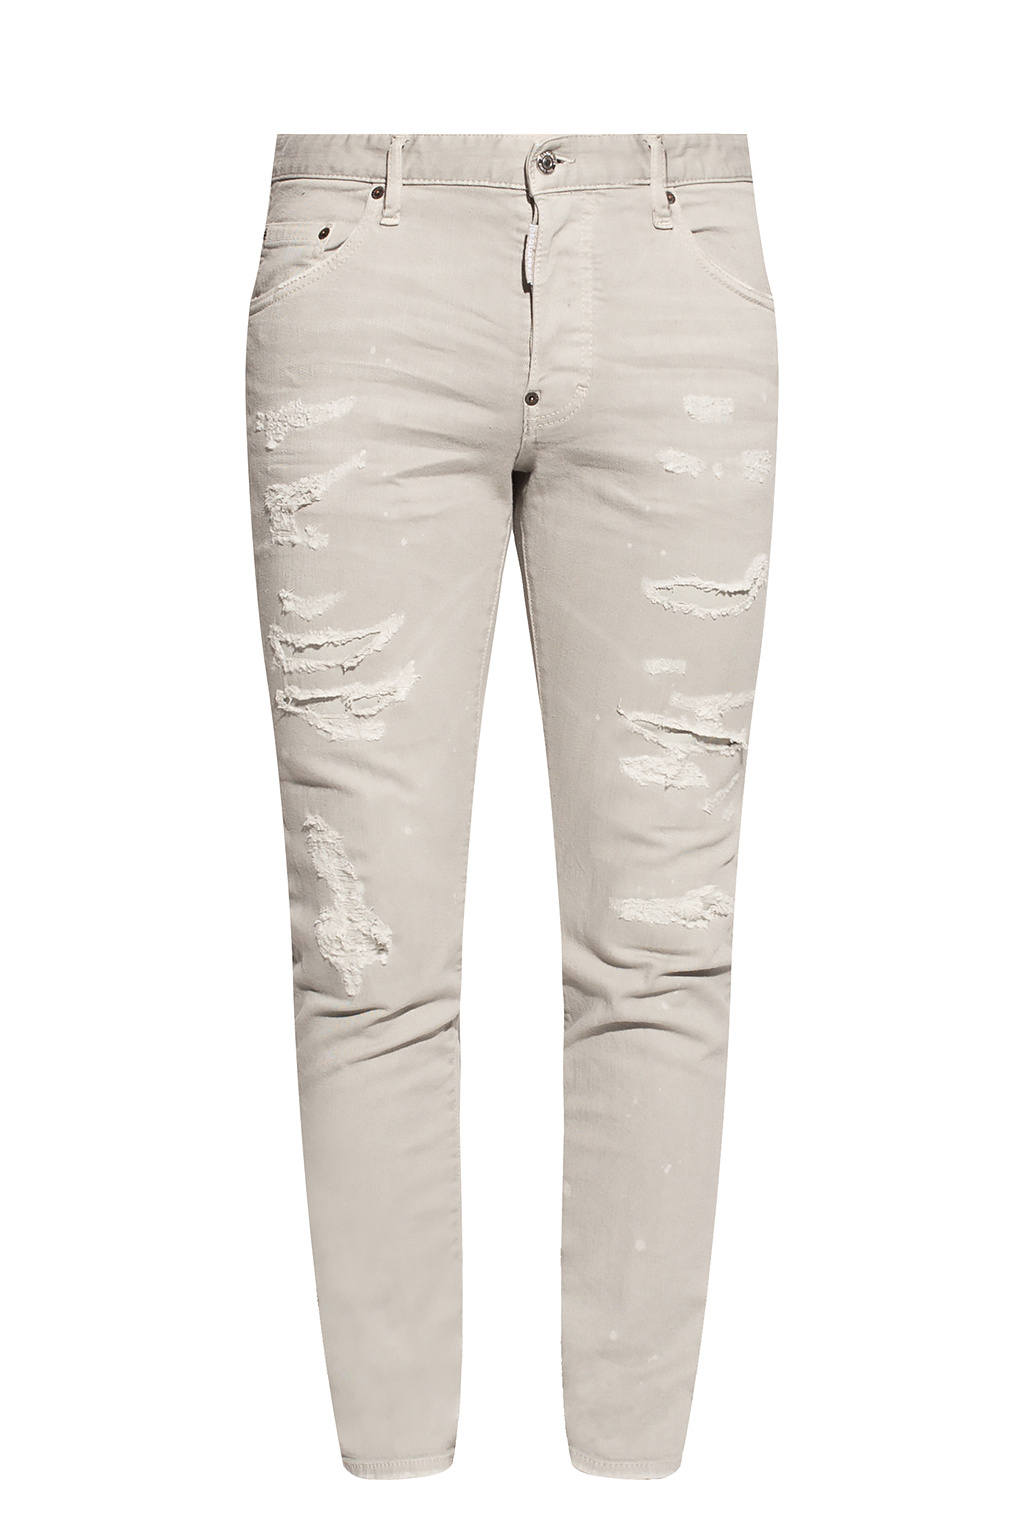 jean taille basse beigegris - 'Skater Jean' jeans Dsquared2